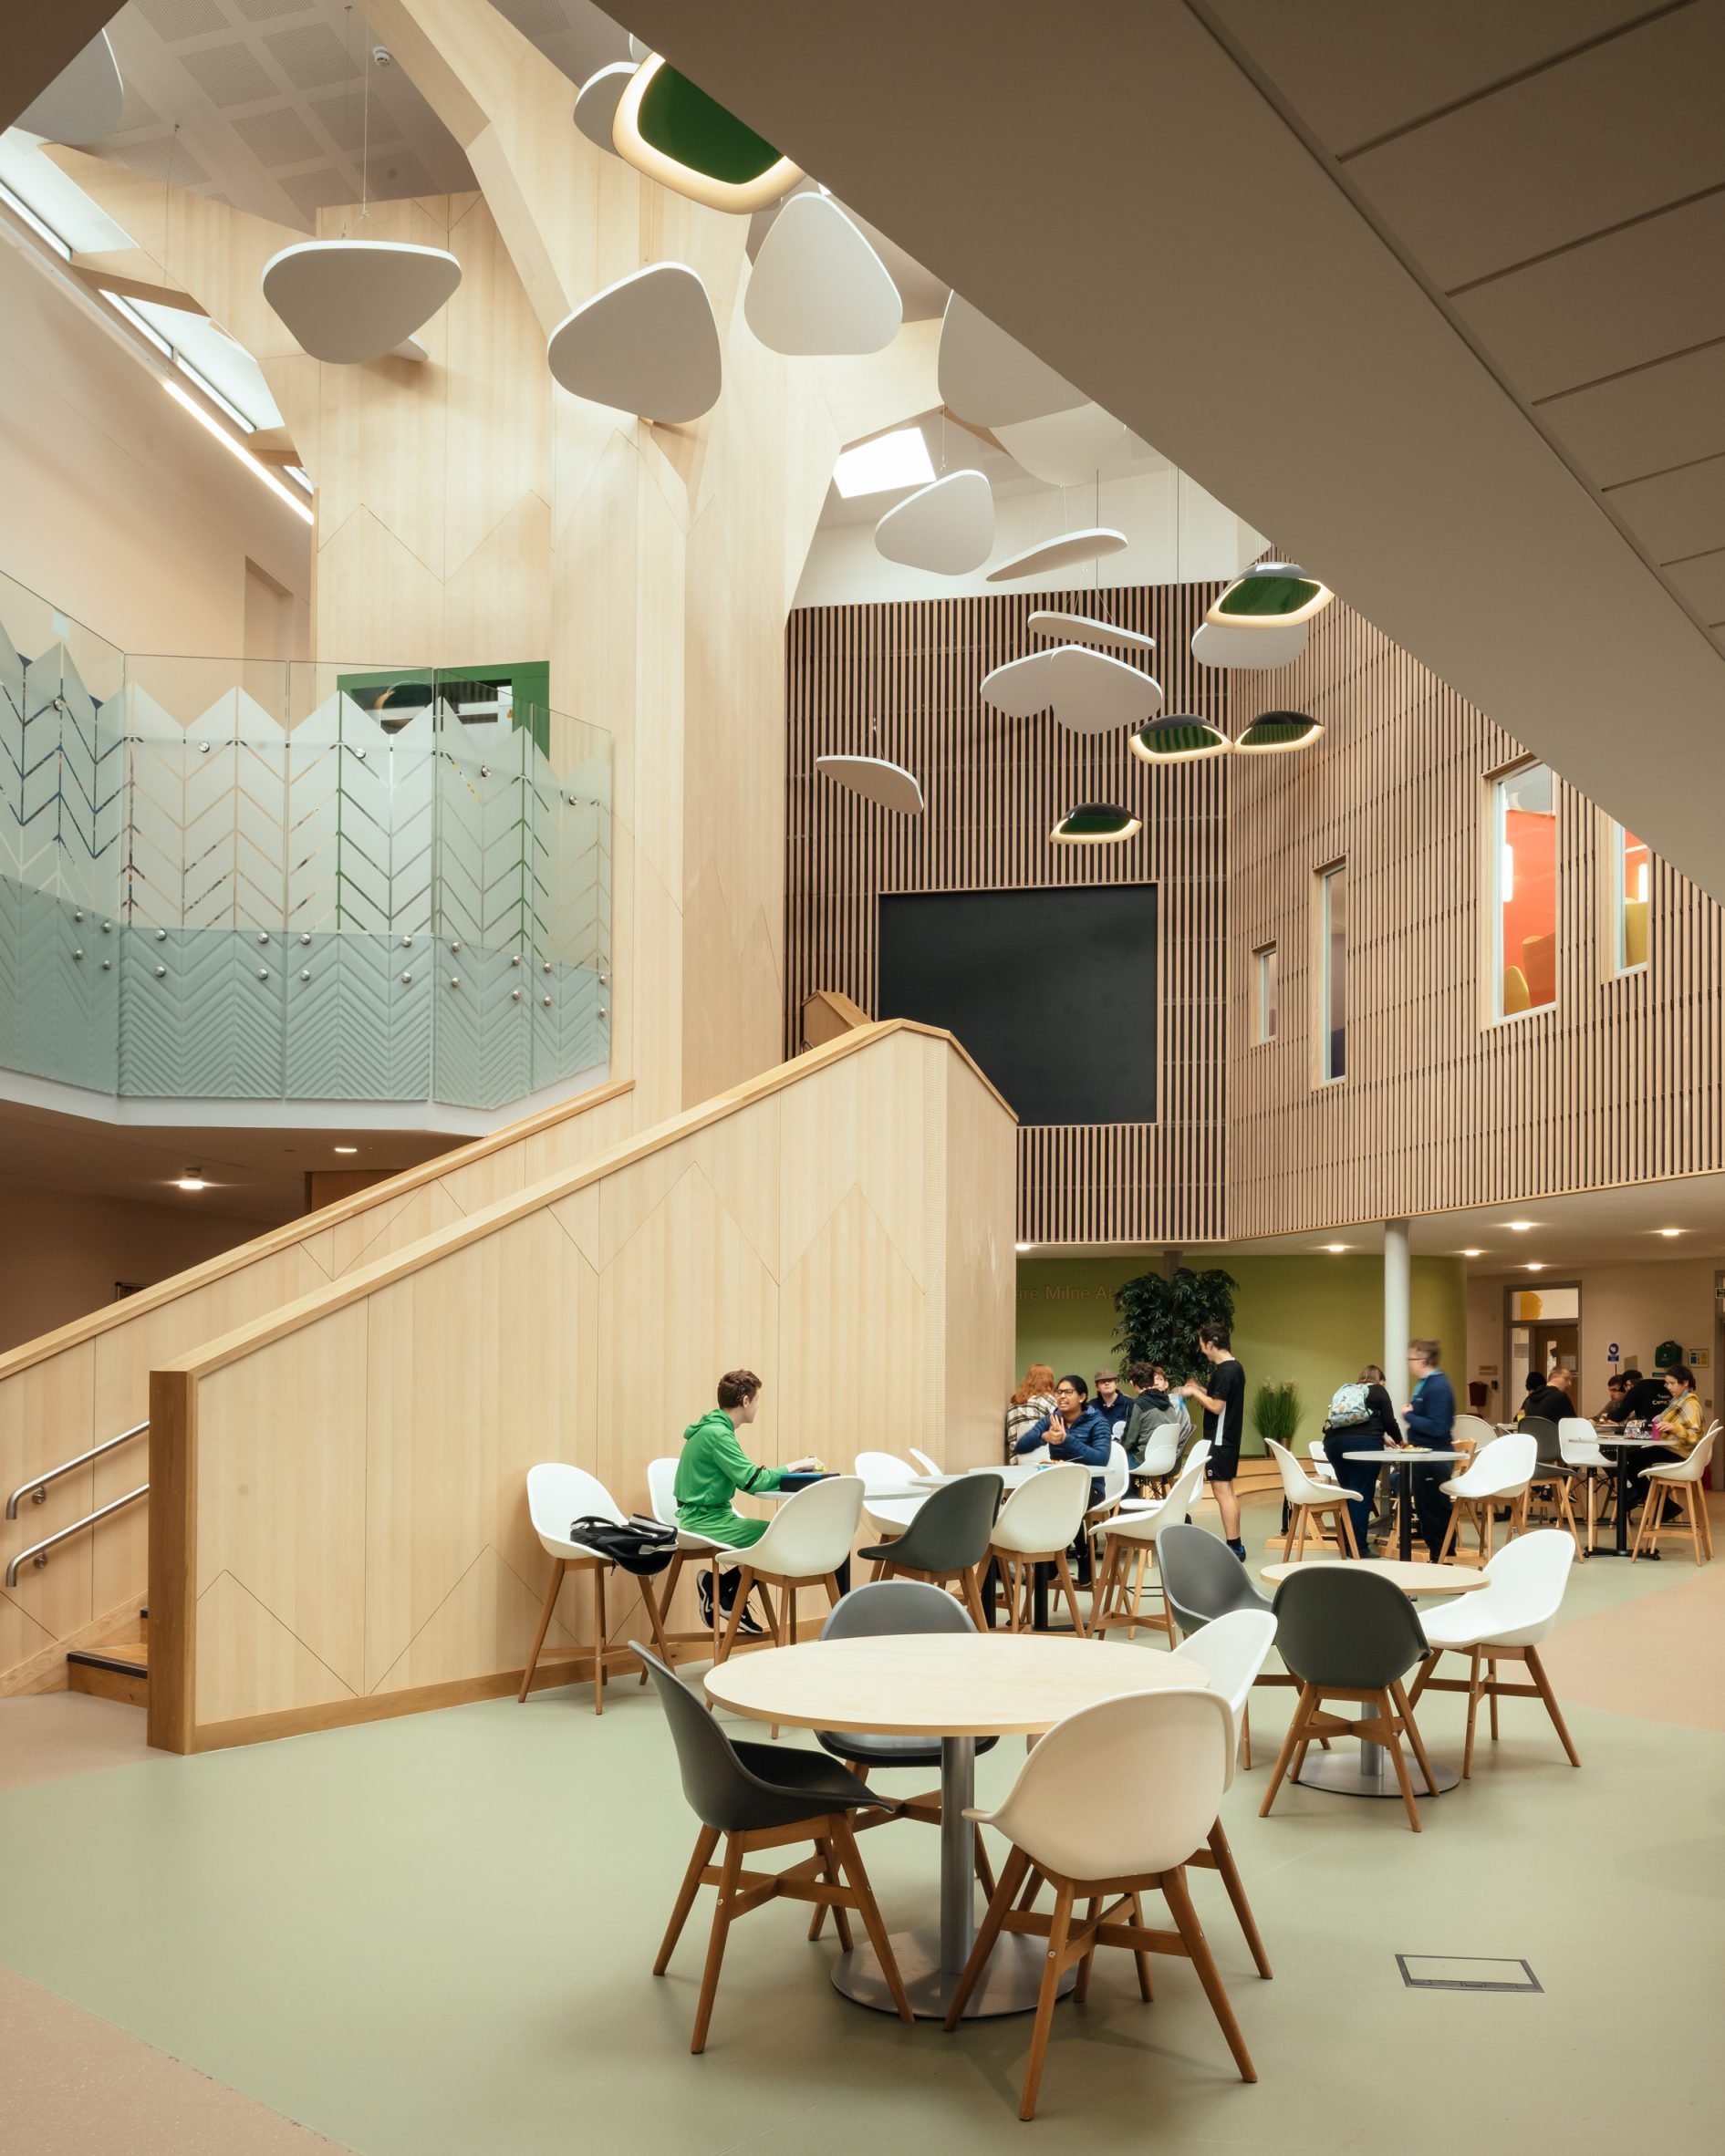 Interior image of The Deaf Academy by Stride Treglown